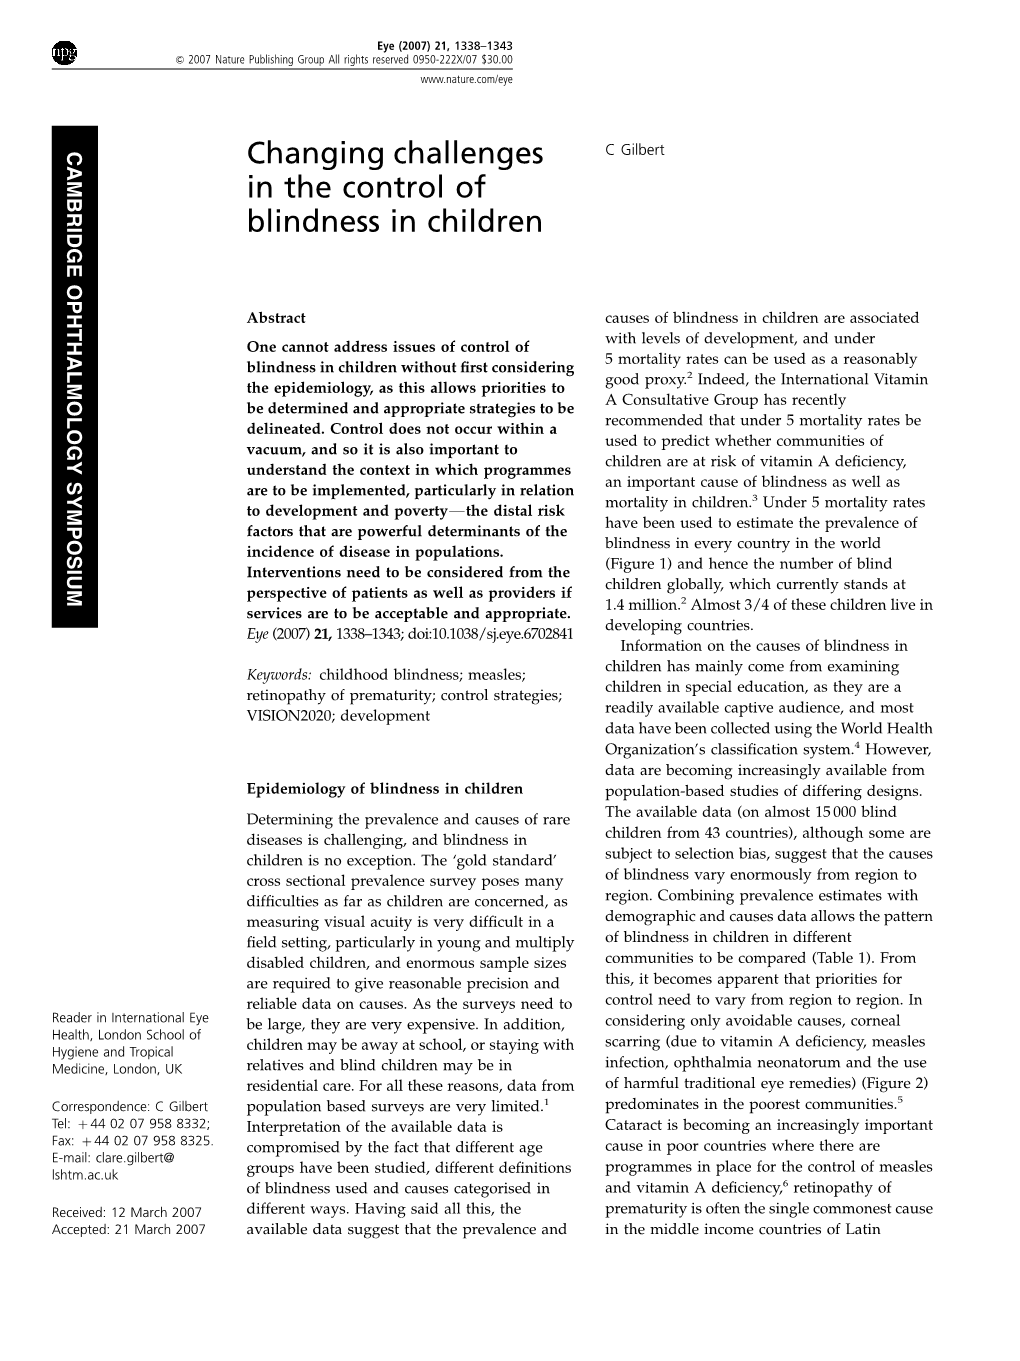 Changing Challenges in the Control of Blindness in Children